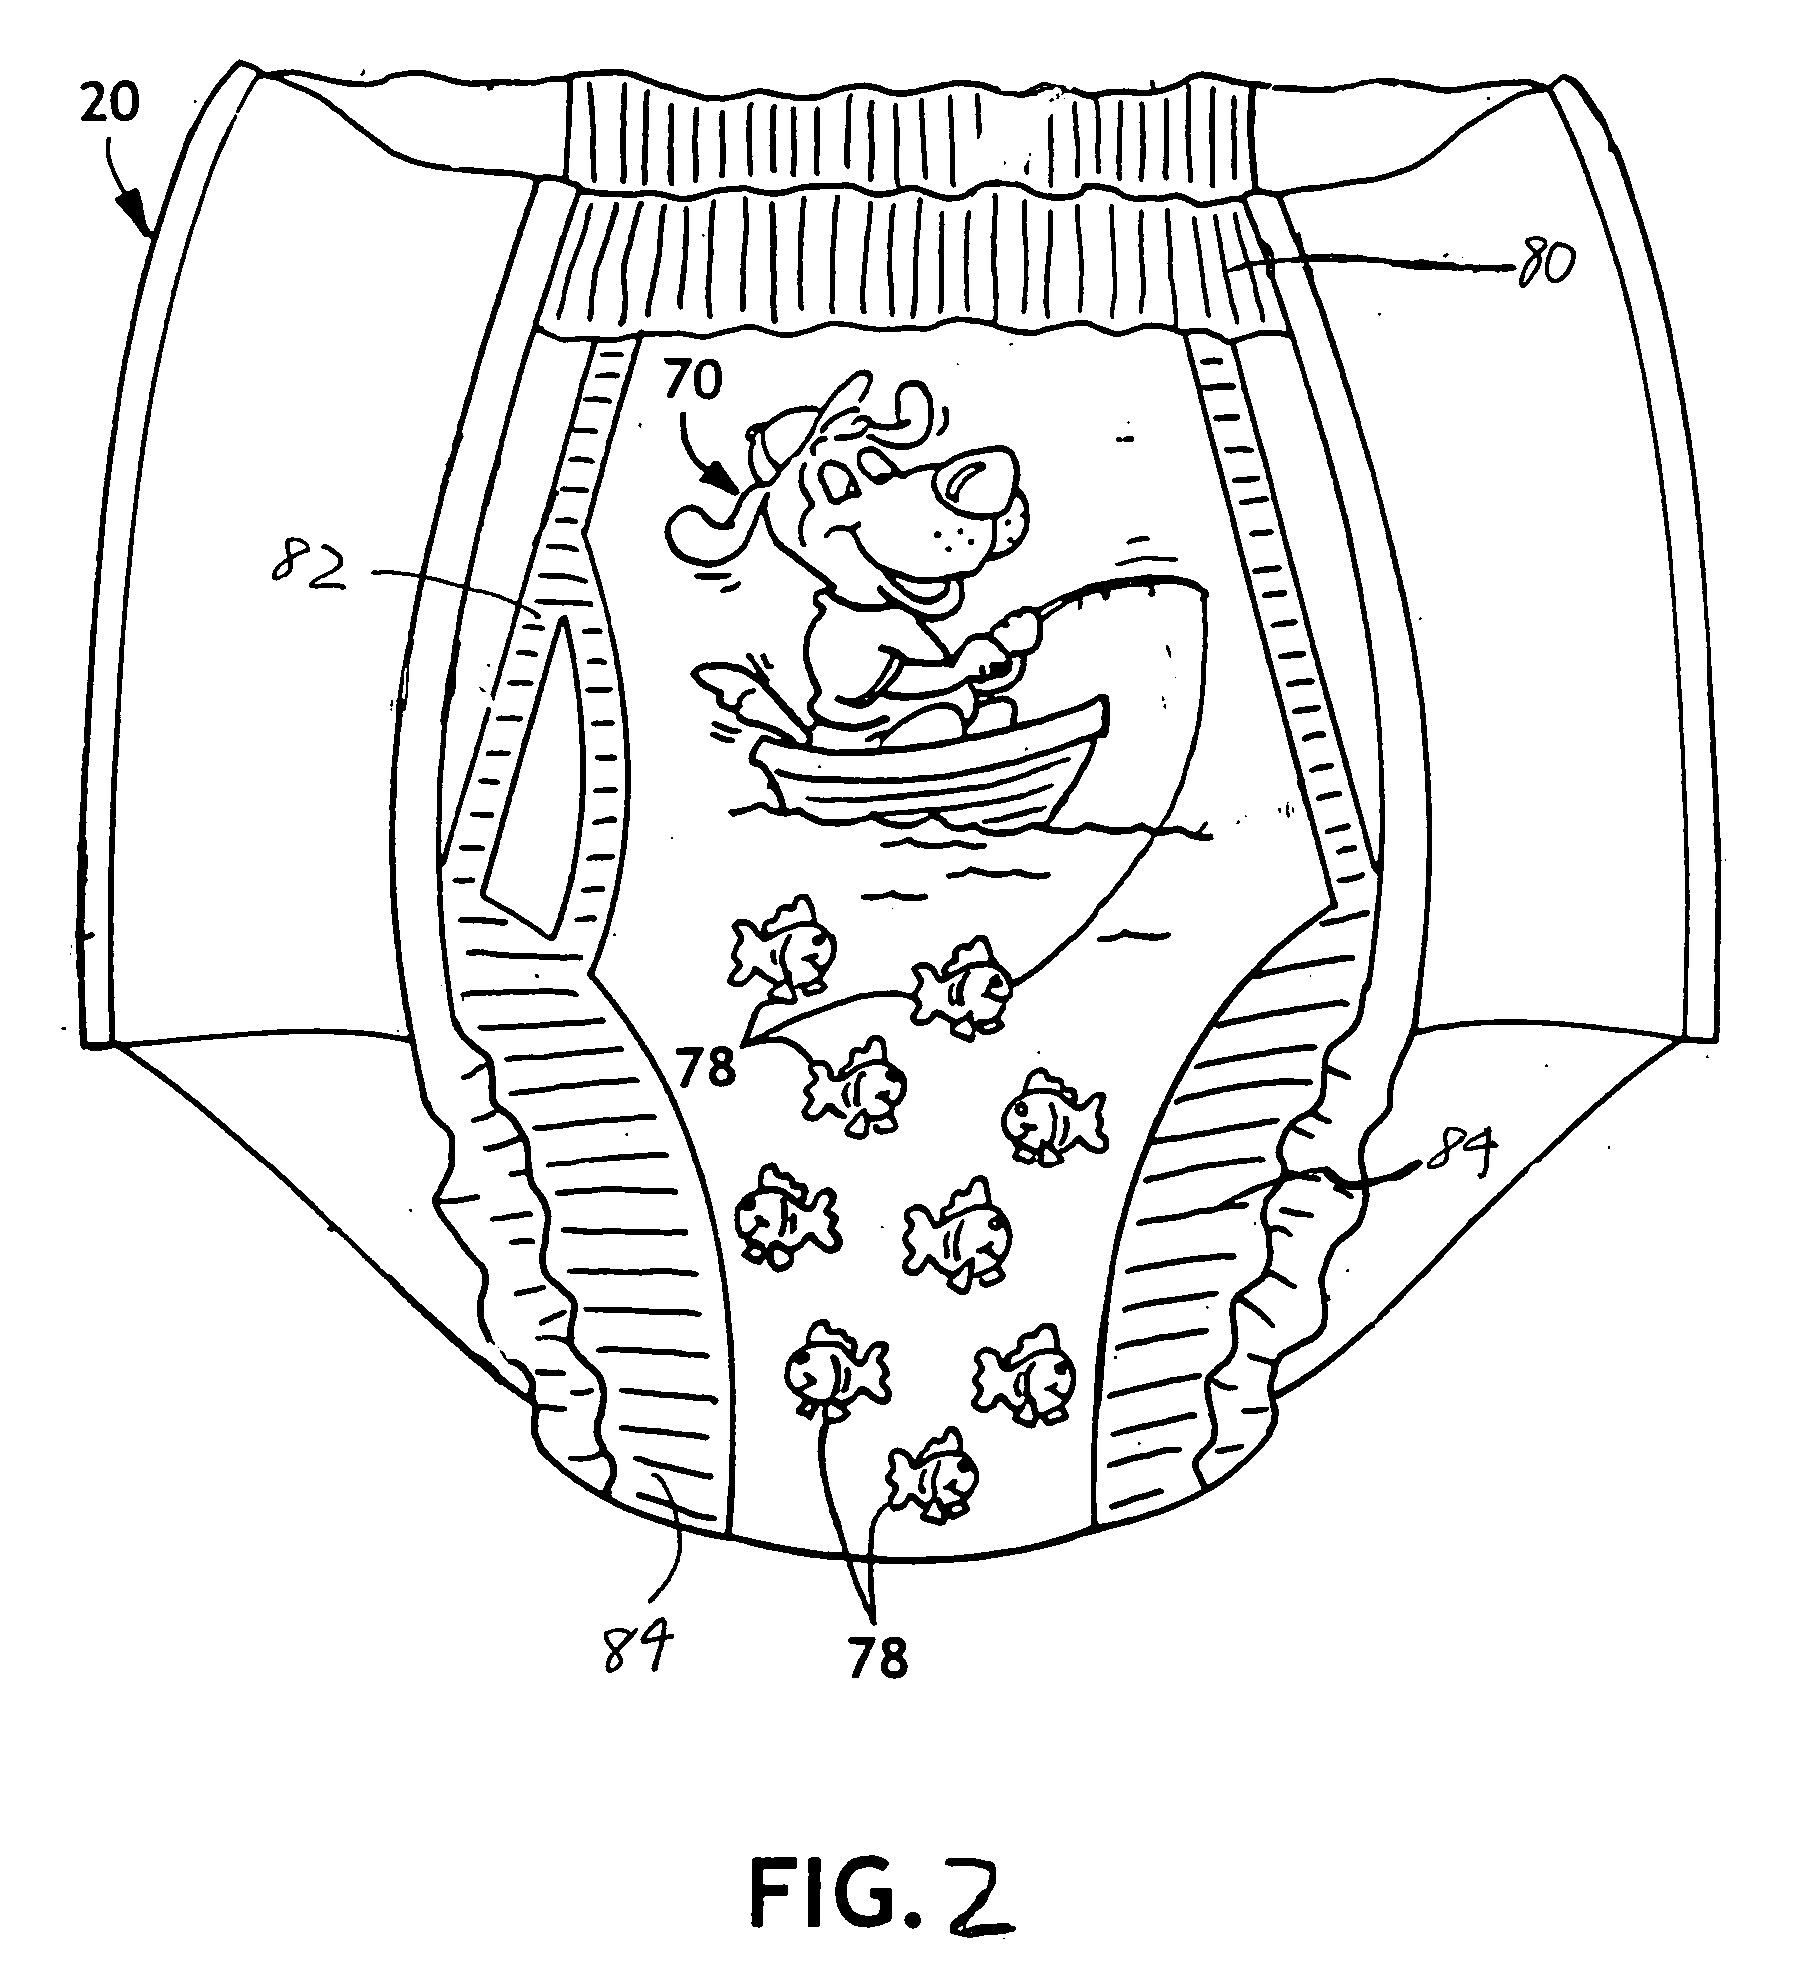 Method of enunciating a prerecorded message related to toilet training in response to a contact